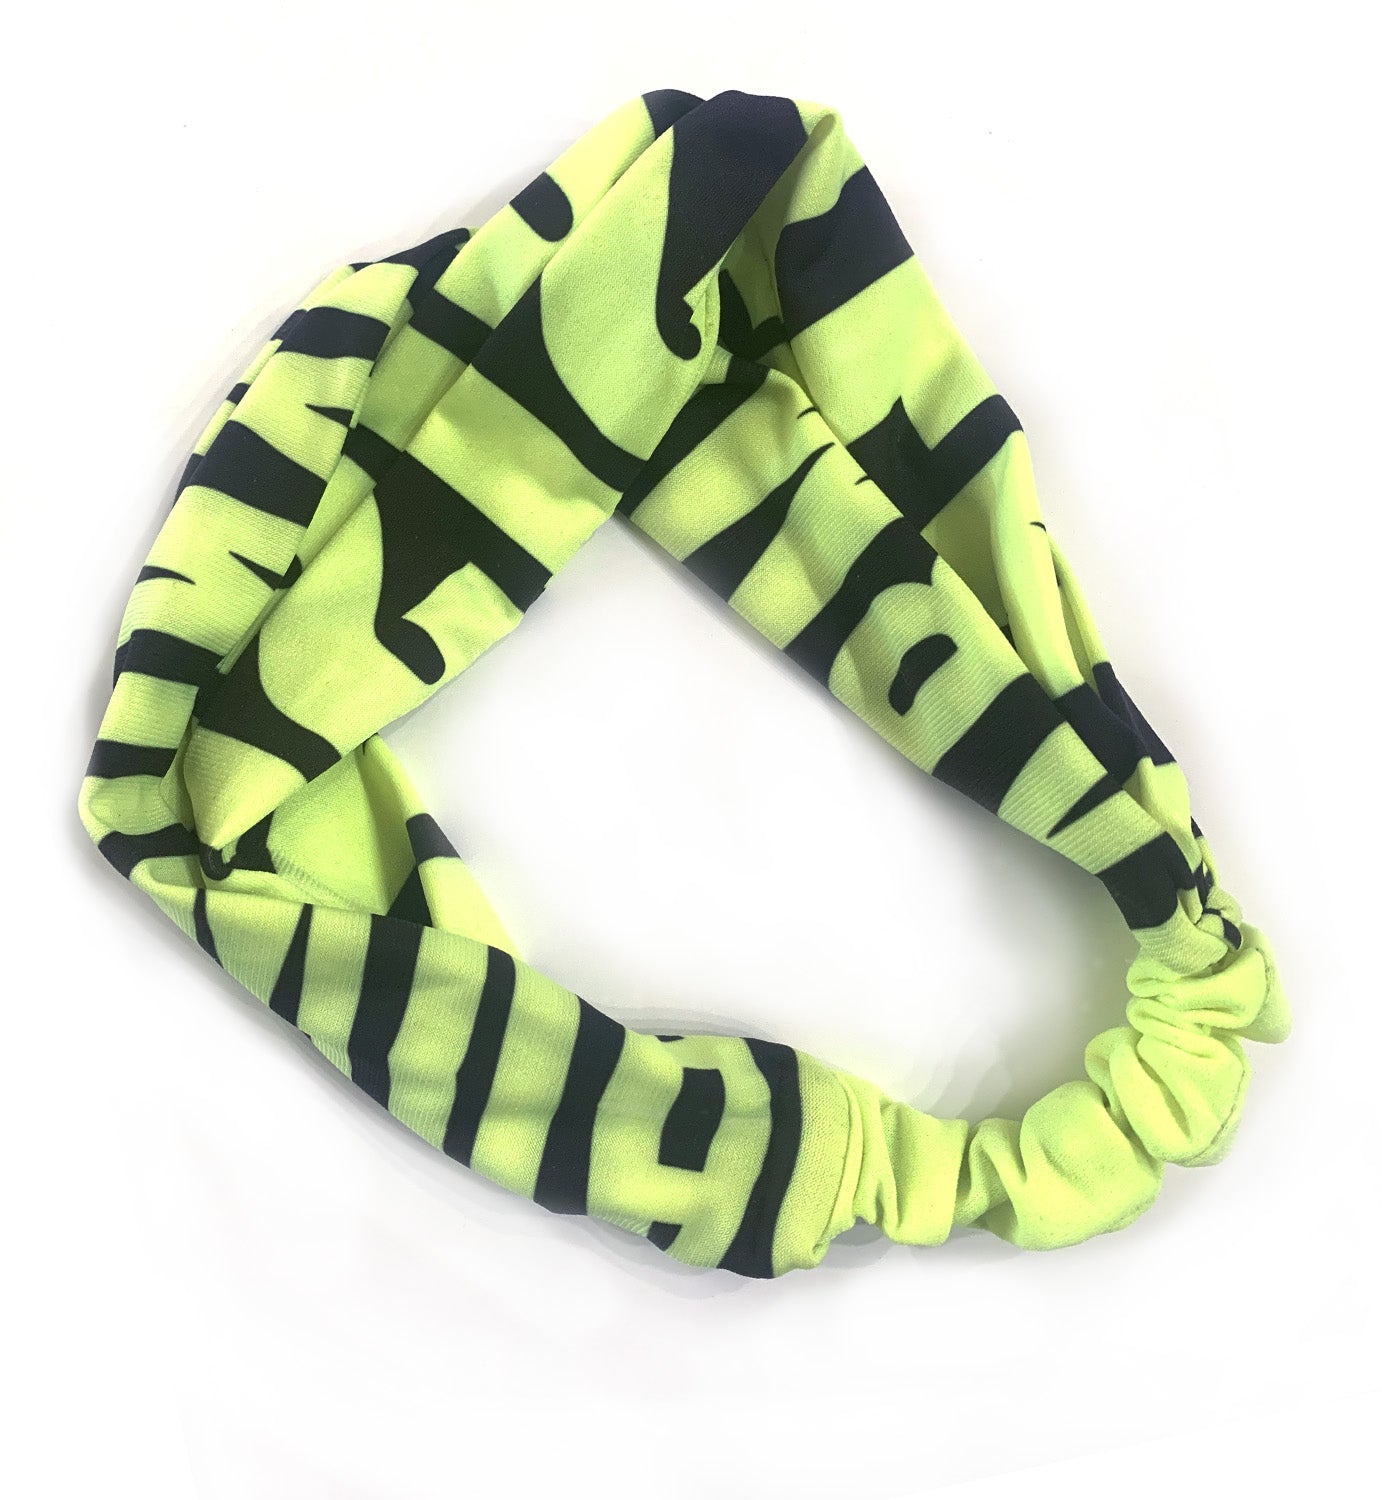 Headband - Abstract Graphic Type Print - "Consistent"